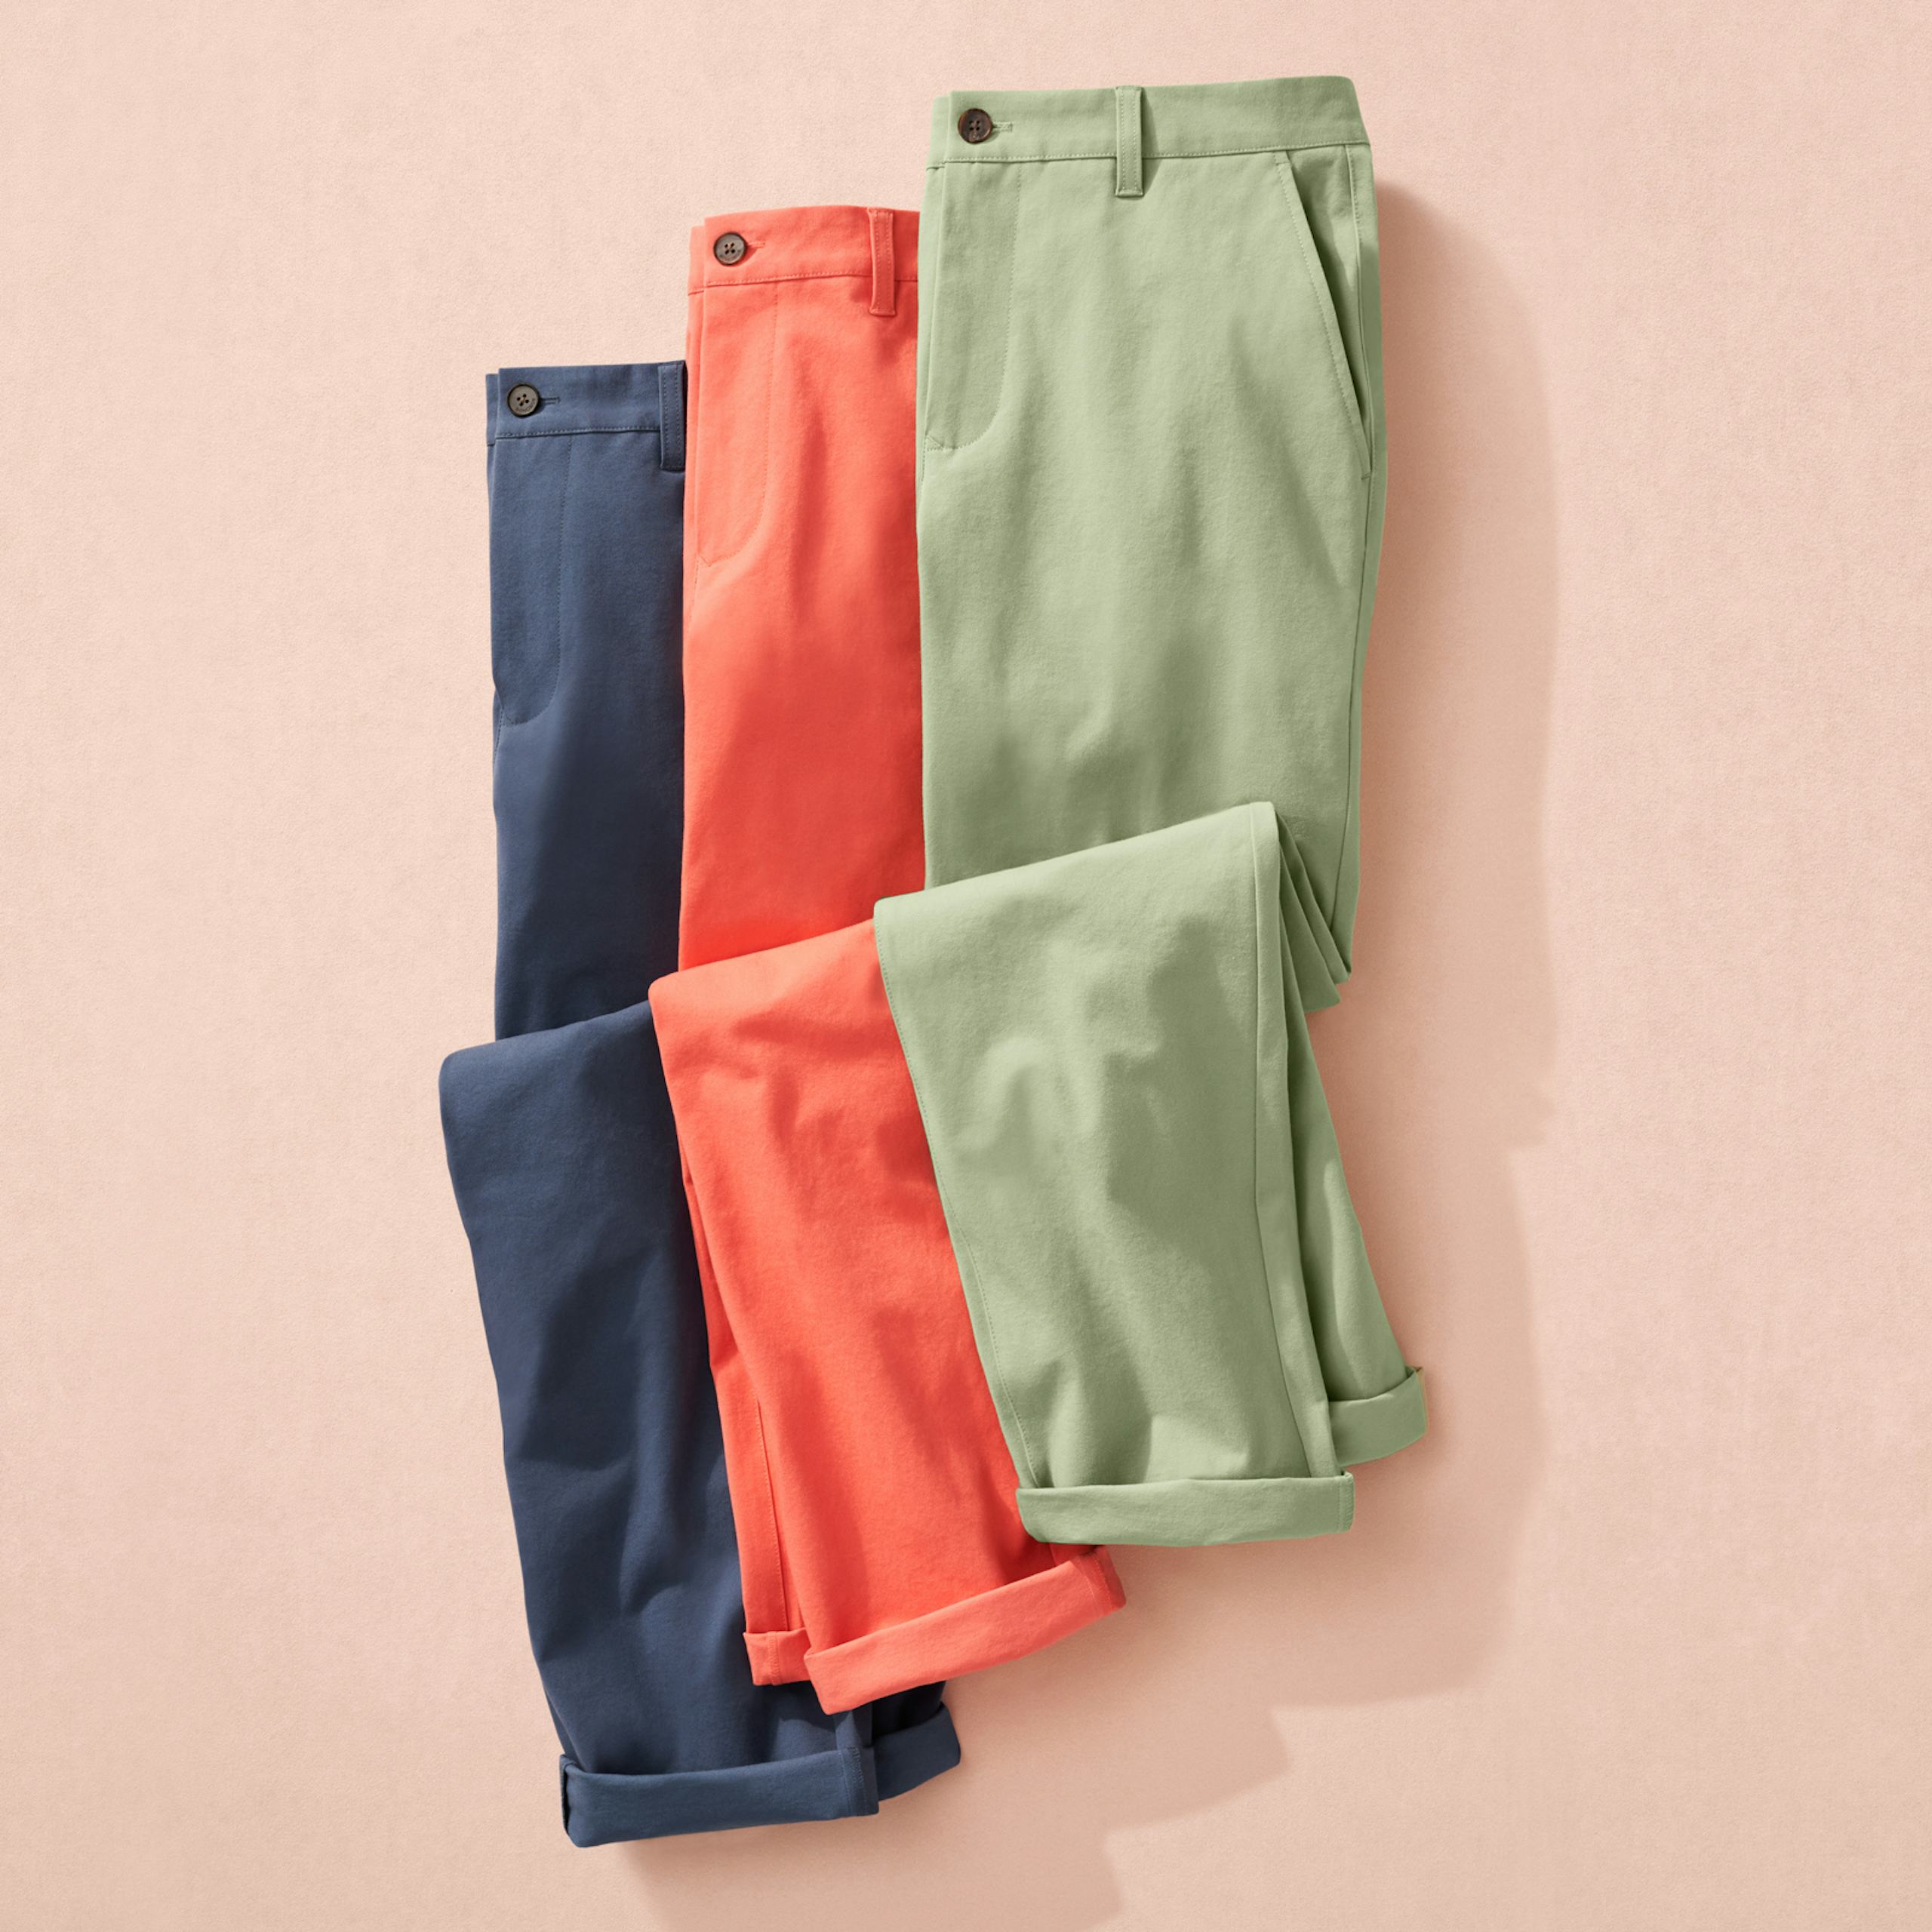 3 pairs of overlapping blue, red, and green chinos